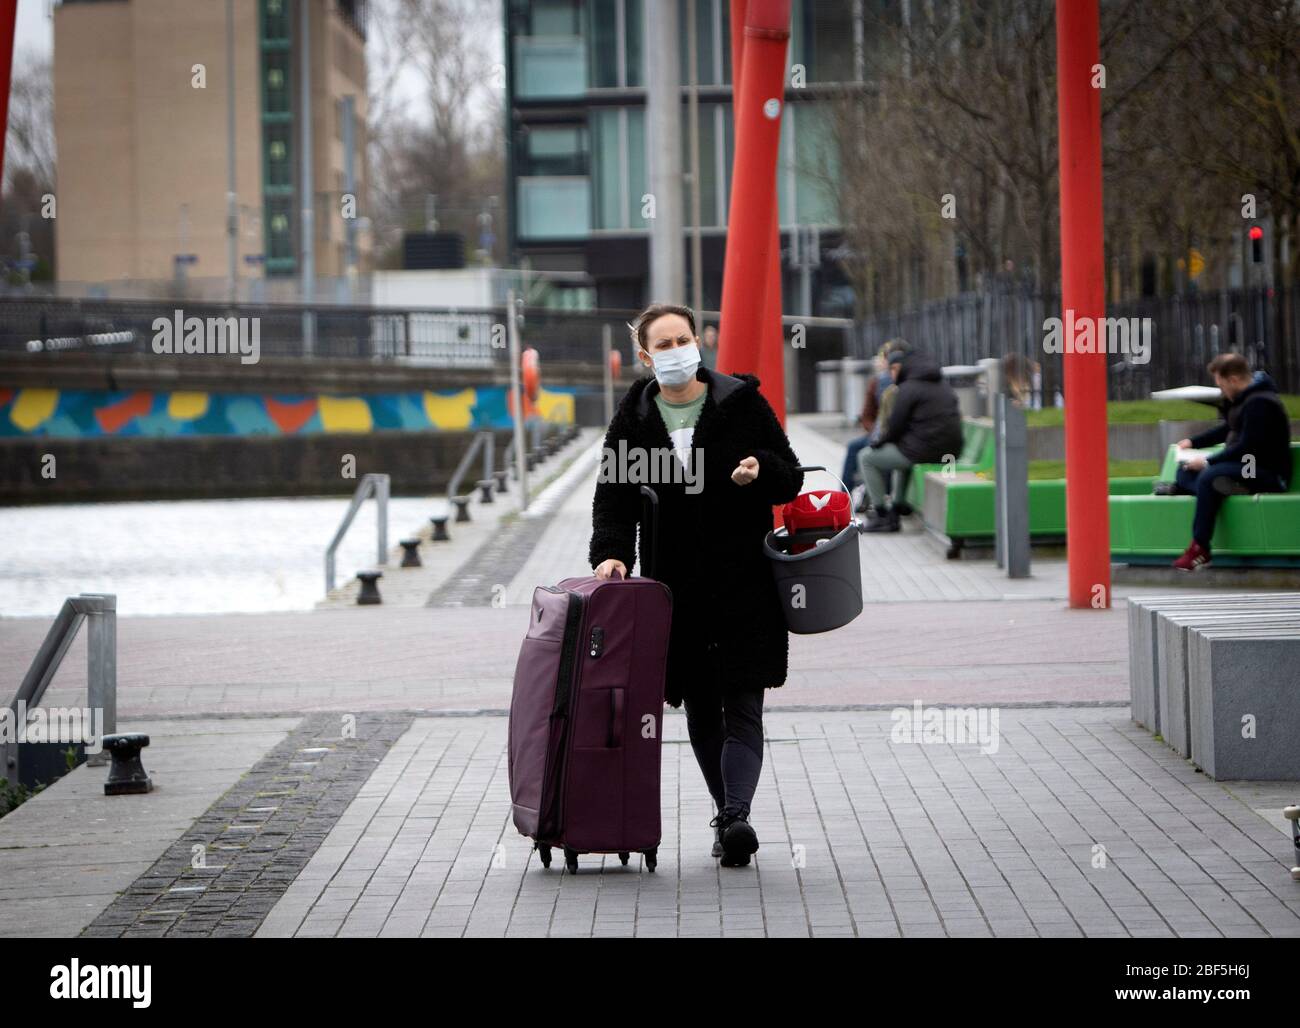 Dublin, Ireland - April 6, 2020: a woman wearing a face mask at Grand Canal Dock during Covid-19 lockdown restrictions in the city. Stock Photo